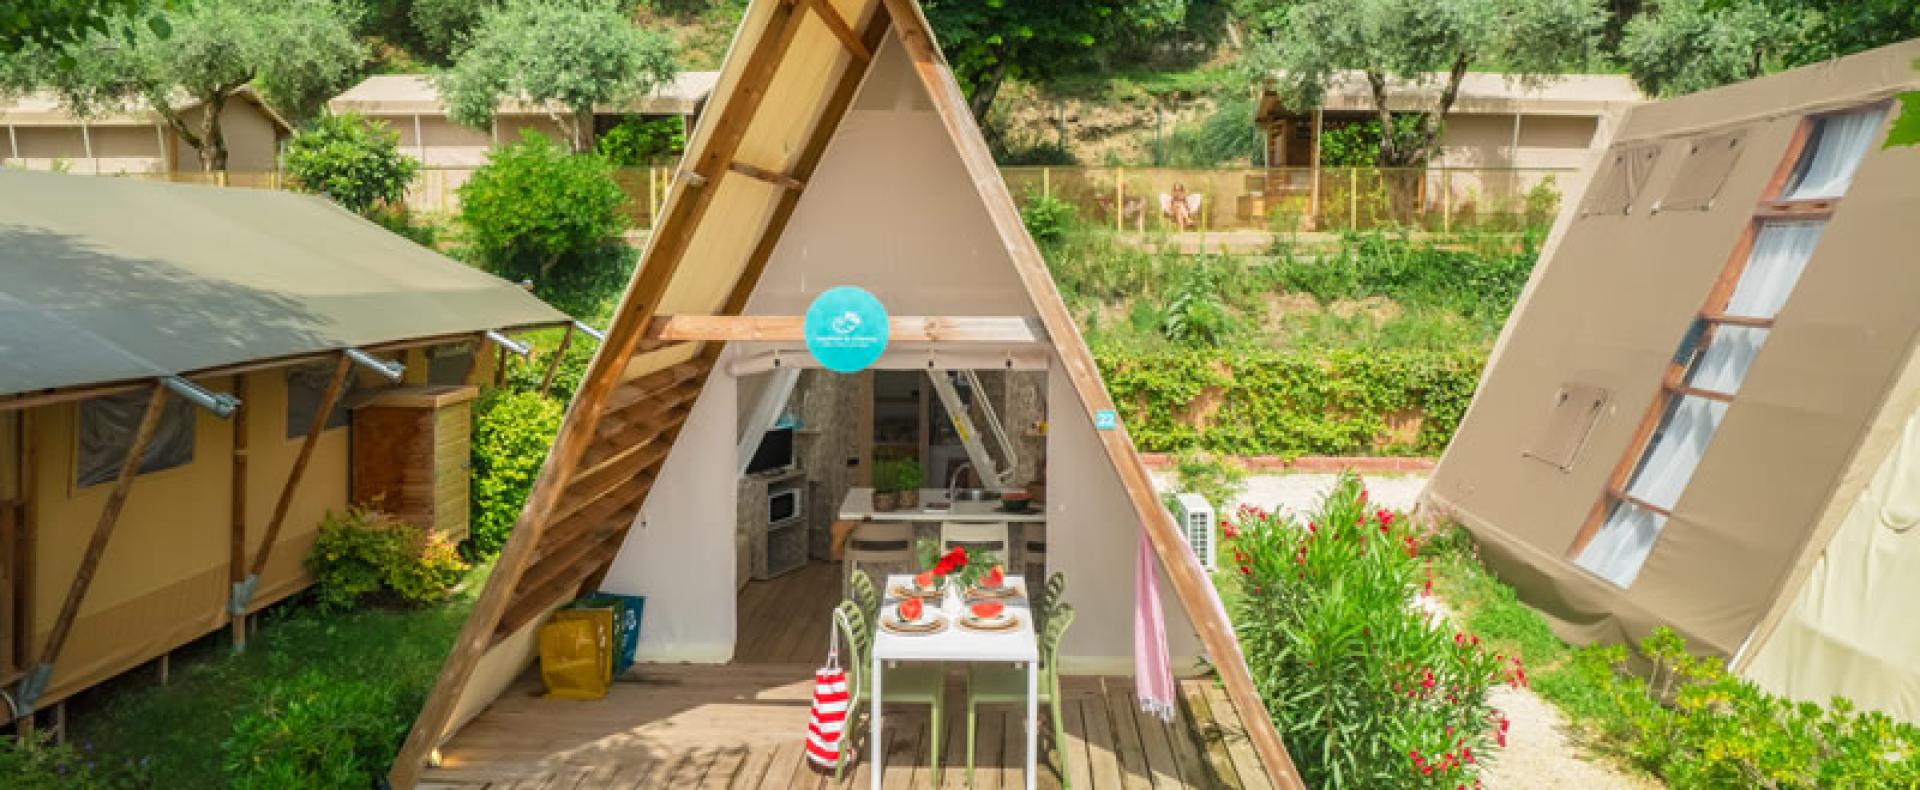 Cozy A-frame cabin surrounded by greenery, with an outdoor set dining table.